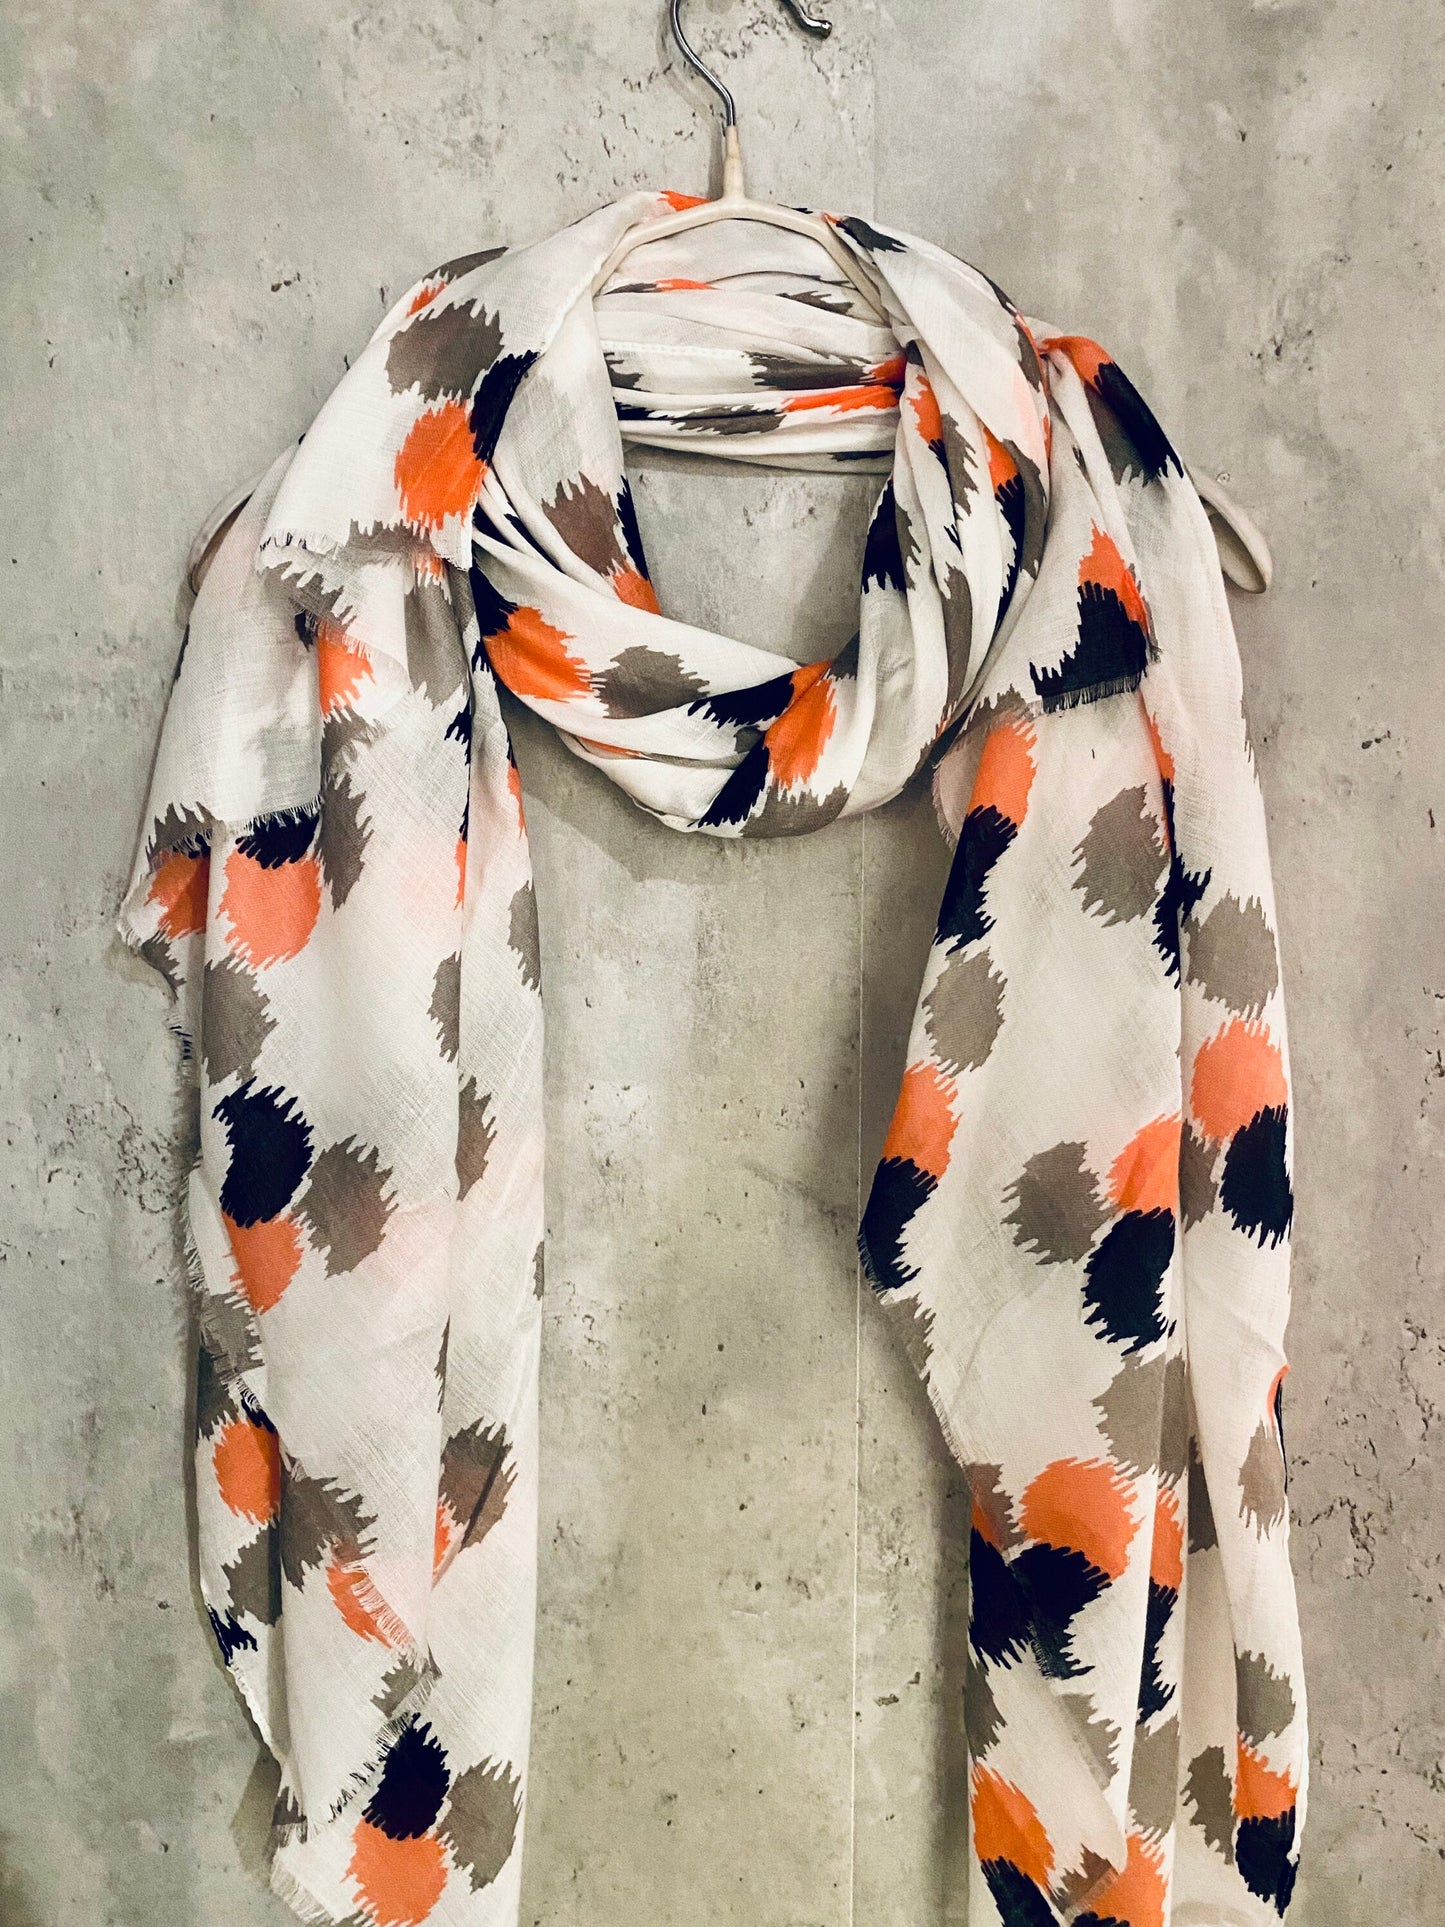 Spotty Ikat Orange White Cotton Scarf/Spring Summer Scarf/Gifts For Mom/UK Seller/Scarf Women/Gifts For Her Birthday Christmas